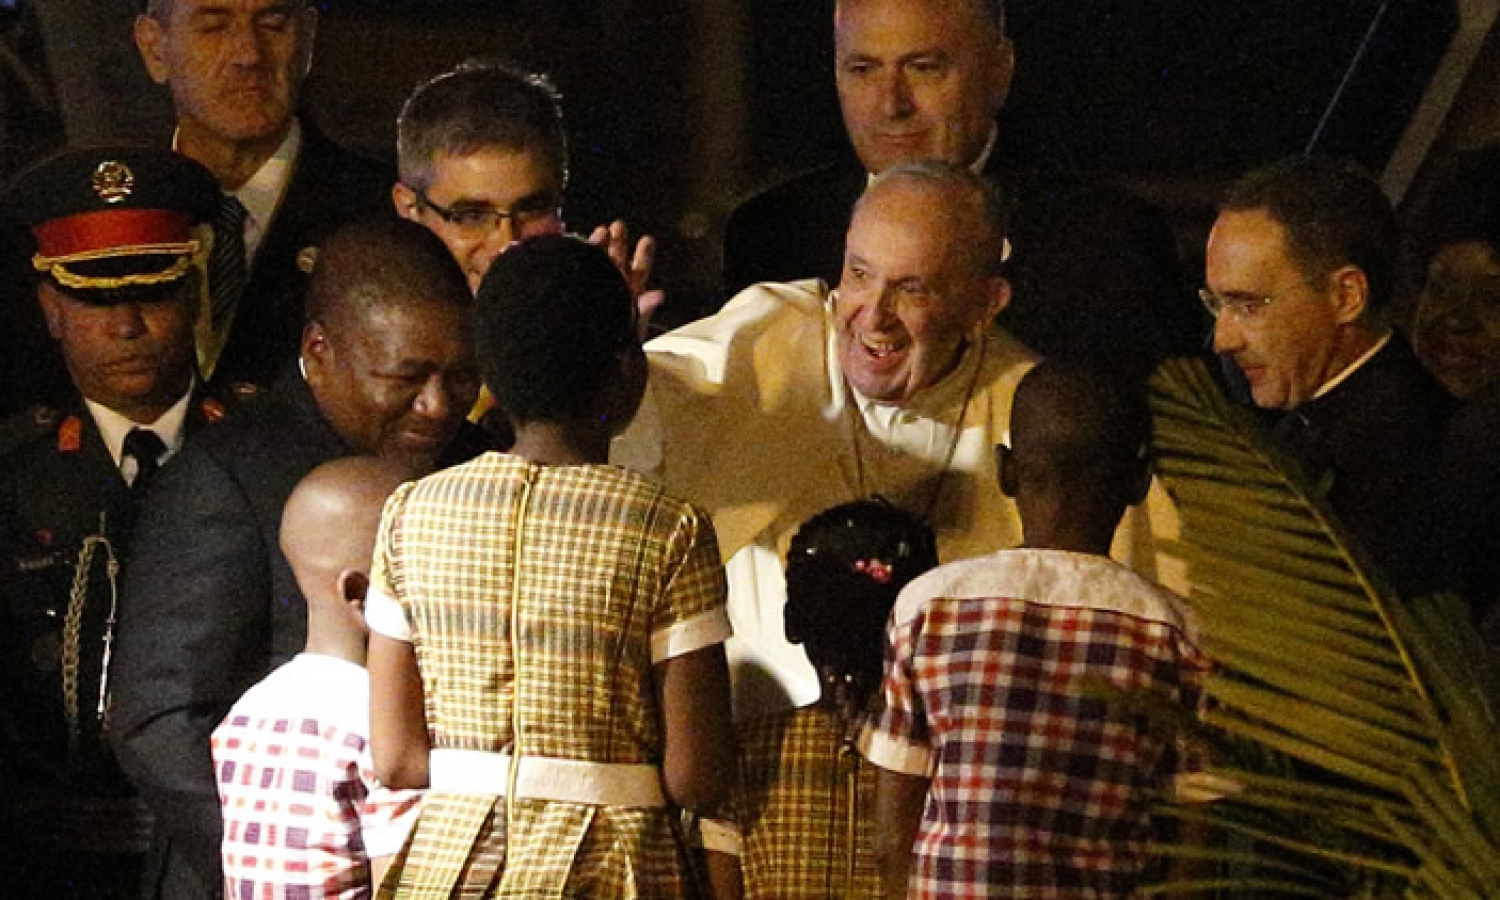 The pope visits the Zimpeto Hospital in Maputo,The place hosts the DREAM program for the care of AIDS patients.